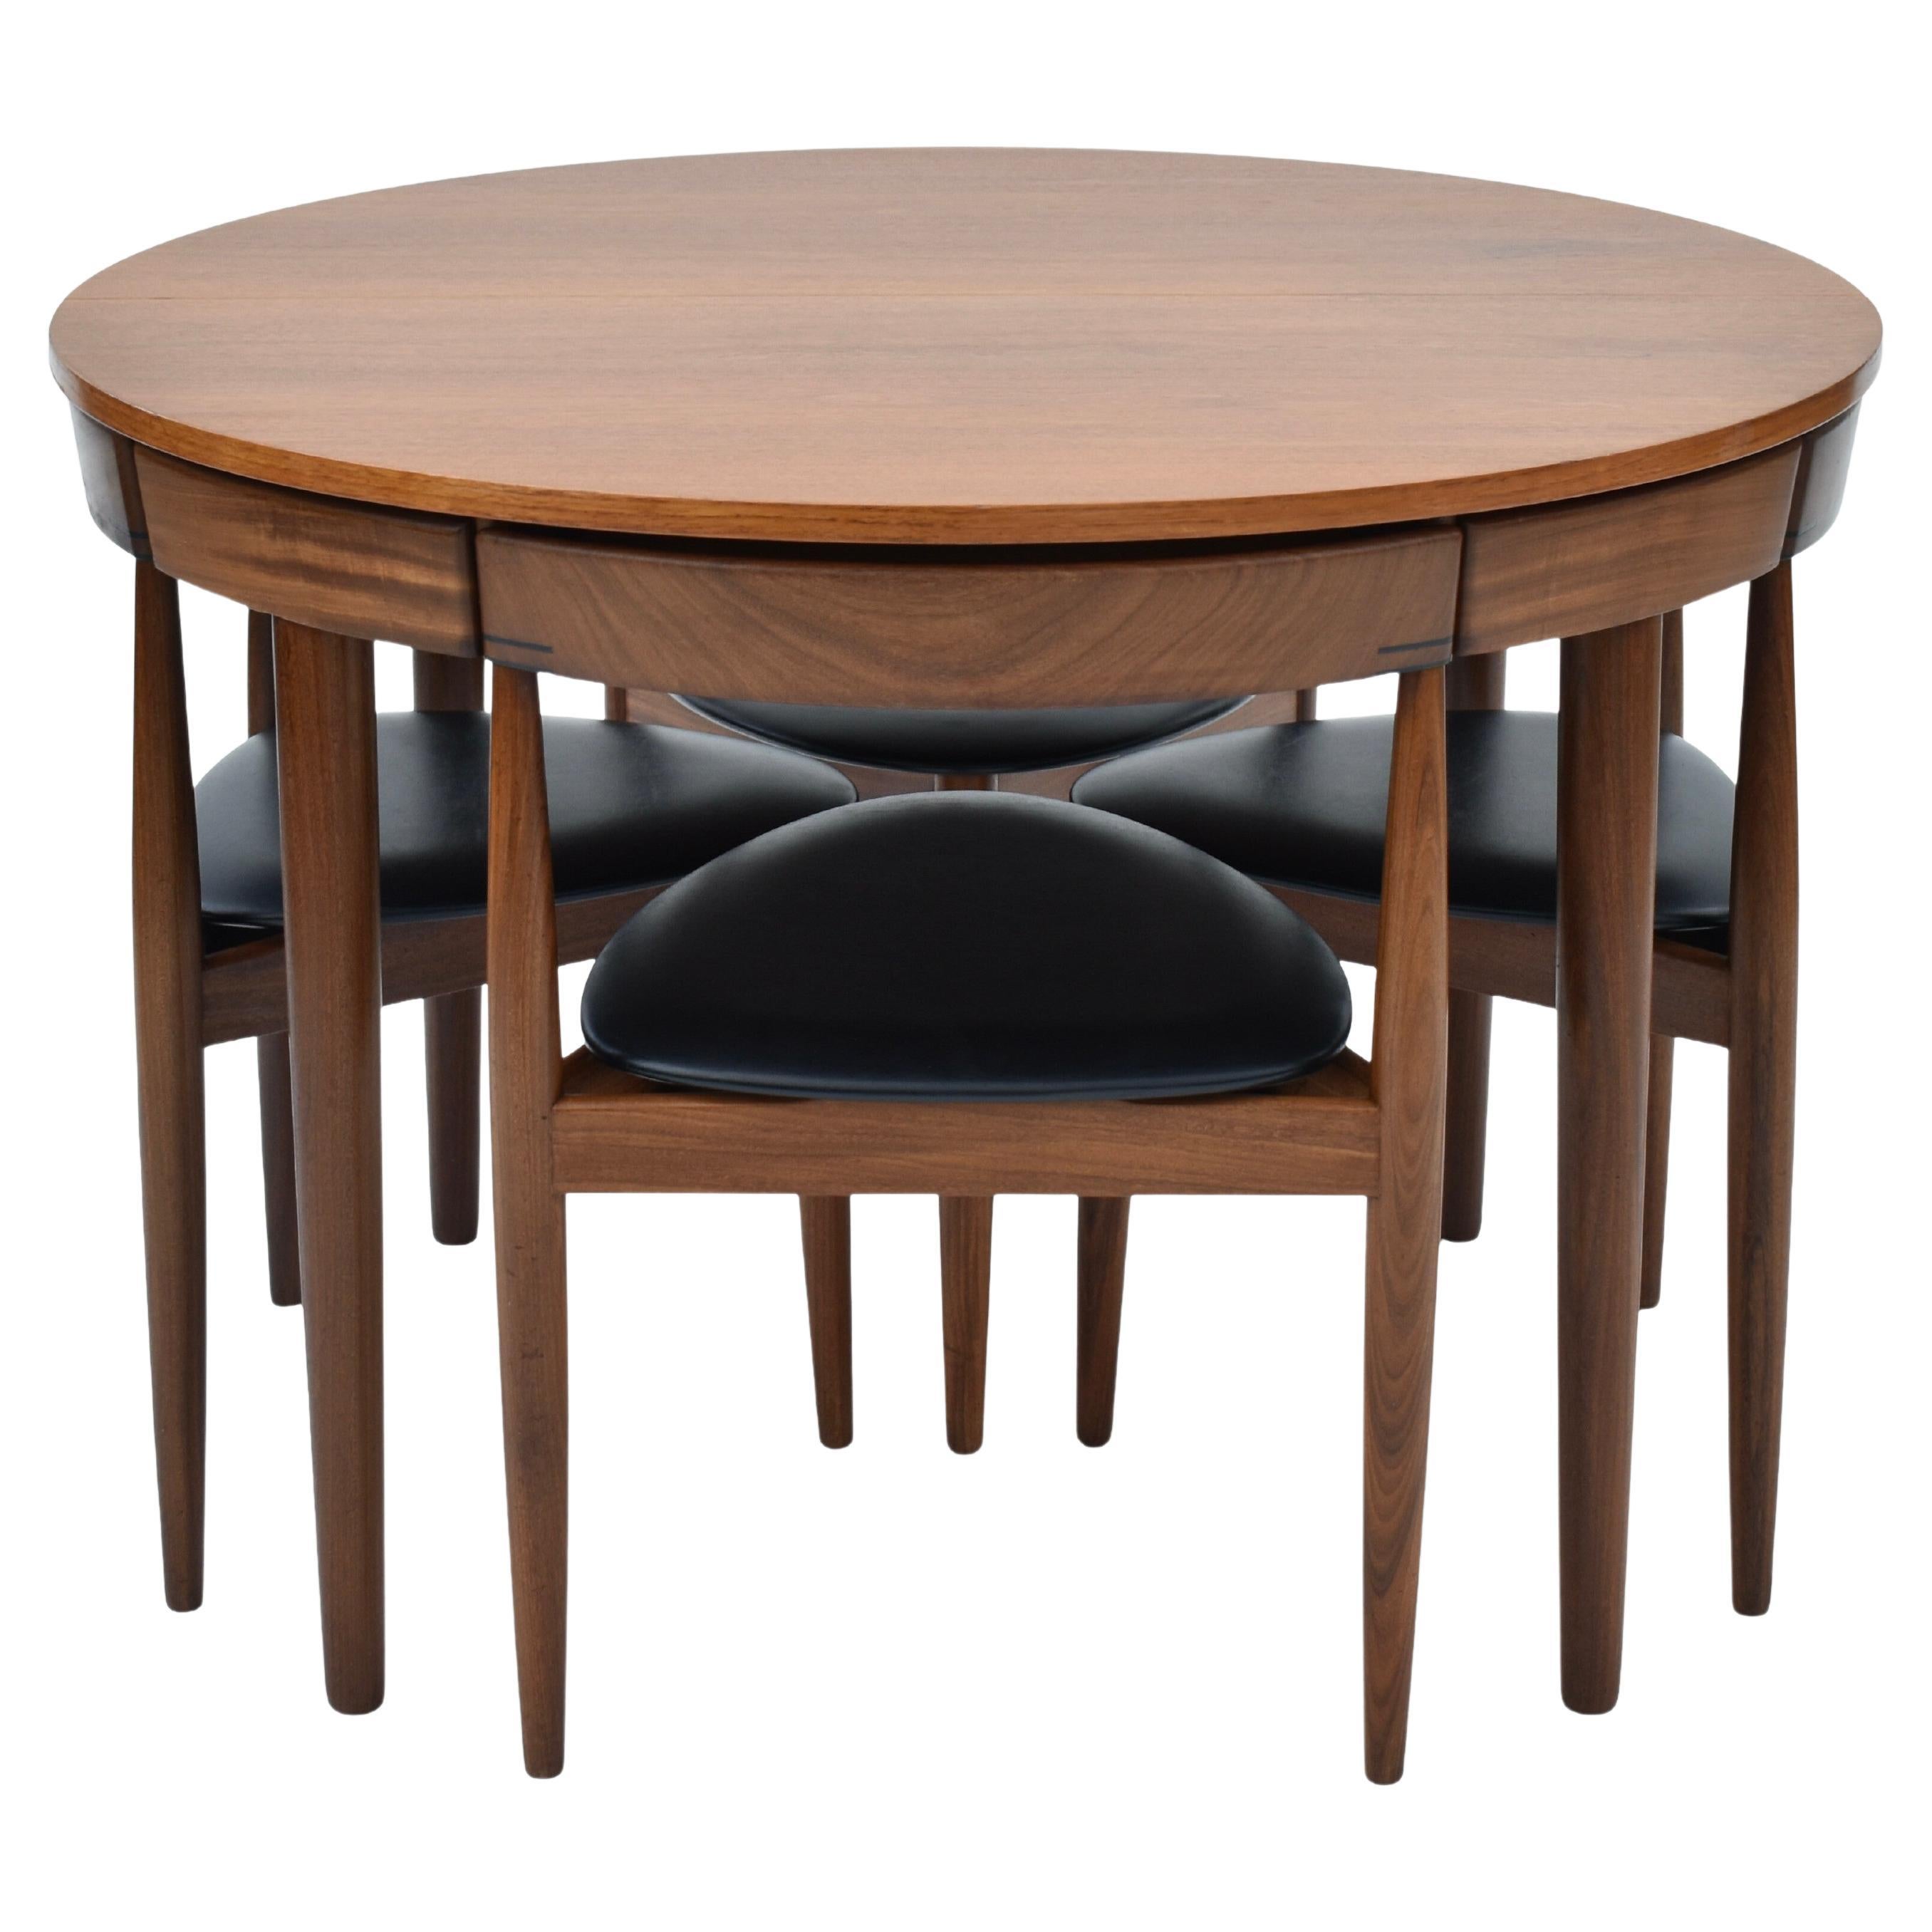 How many chairs fit around a 60-inch round table?